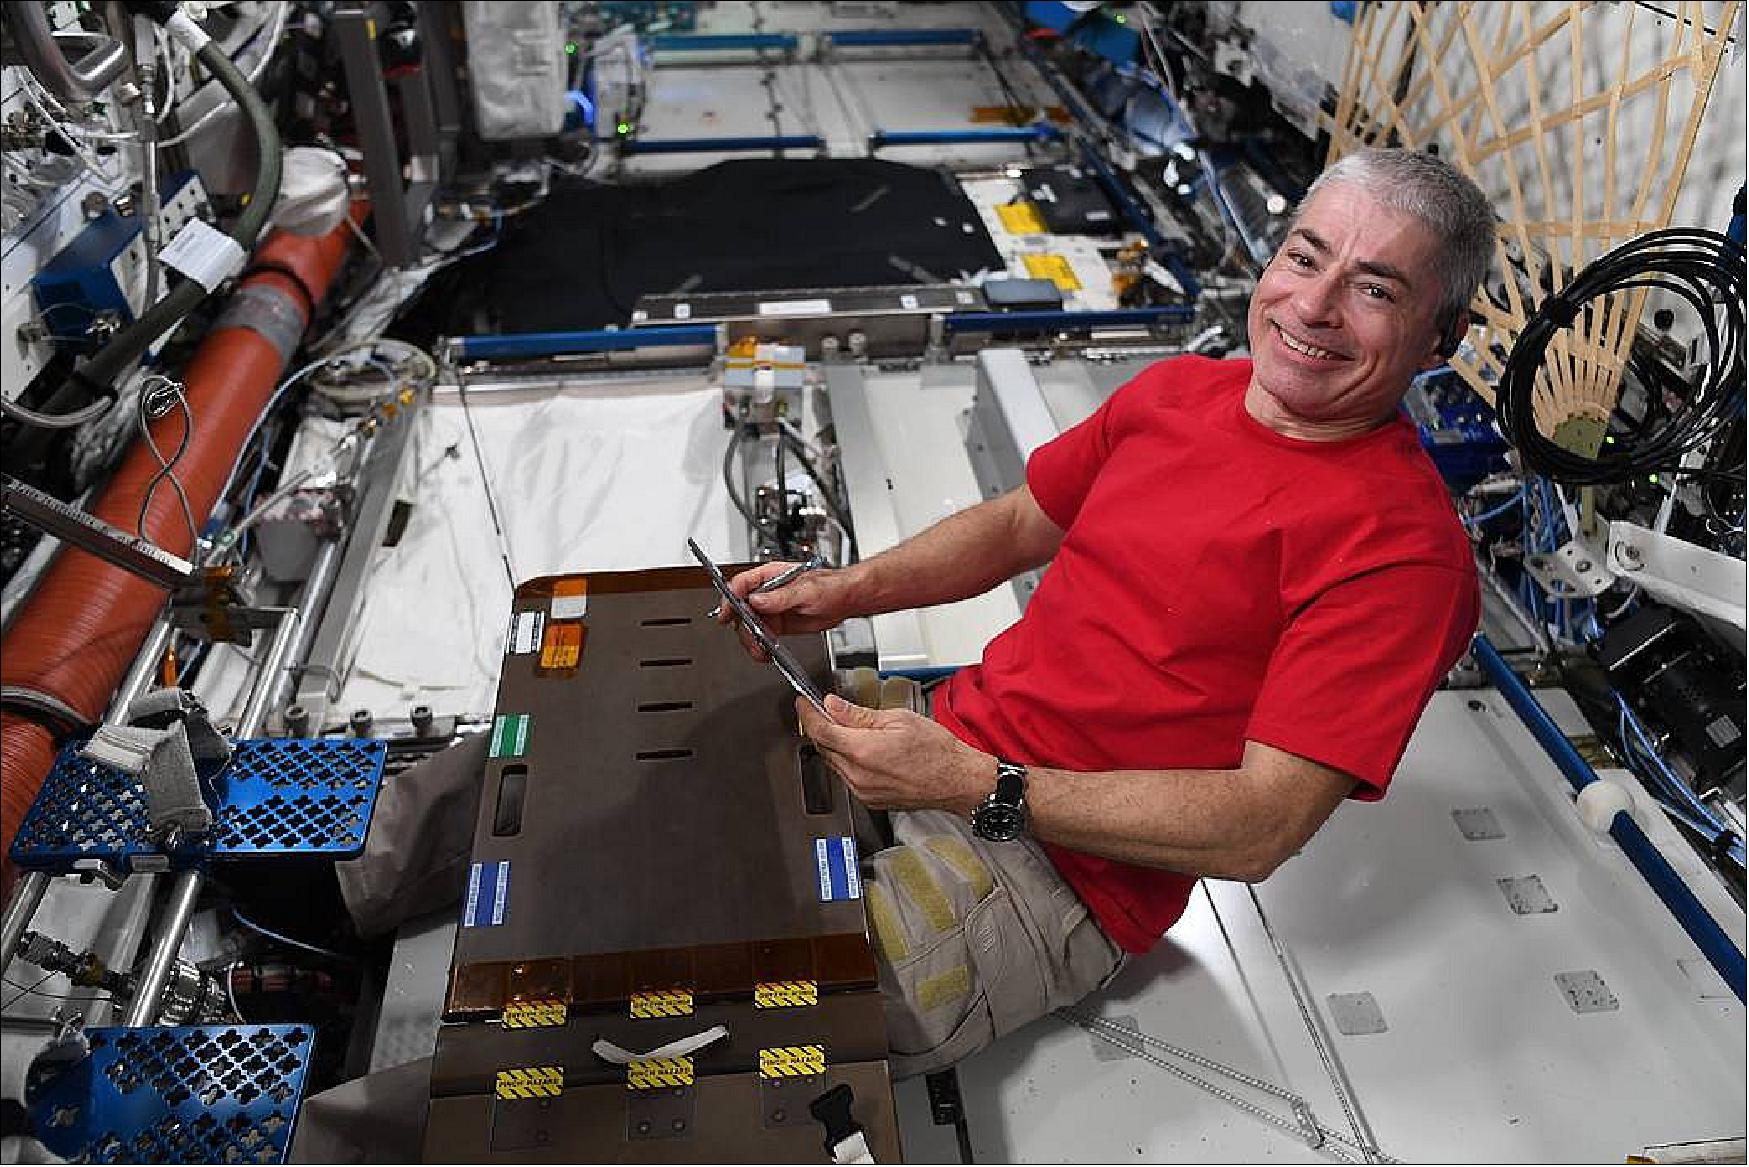 Figure 15: Aboard the International Space Station, NASA astronaut Mark Vande Hei squeezes in time to unwind with a book. Vande Hei made it into record books on Tuesday, March 15, 2022, breaking the record for the most consecutive days in space by an American explorer (image credit: ESA/NASA-T. Pesquet)